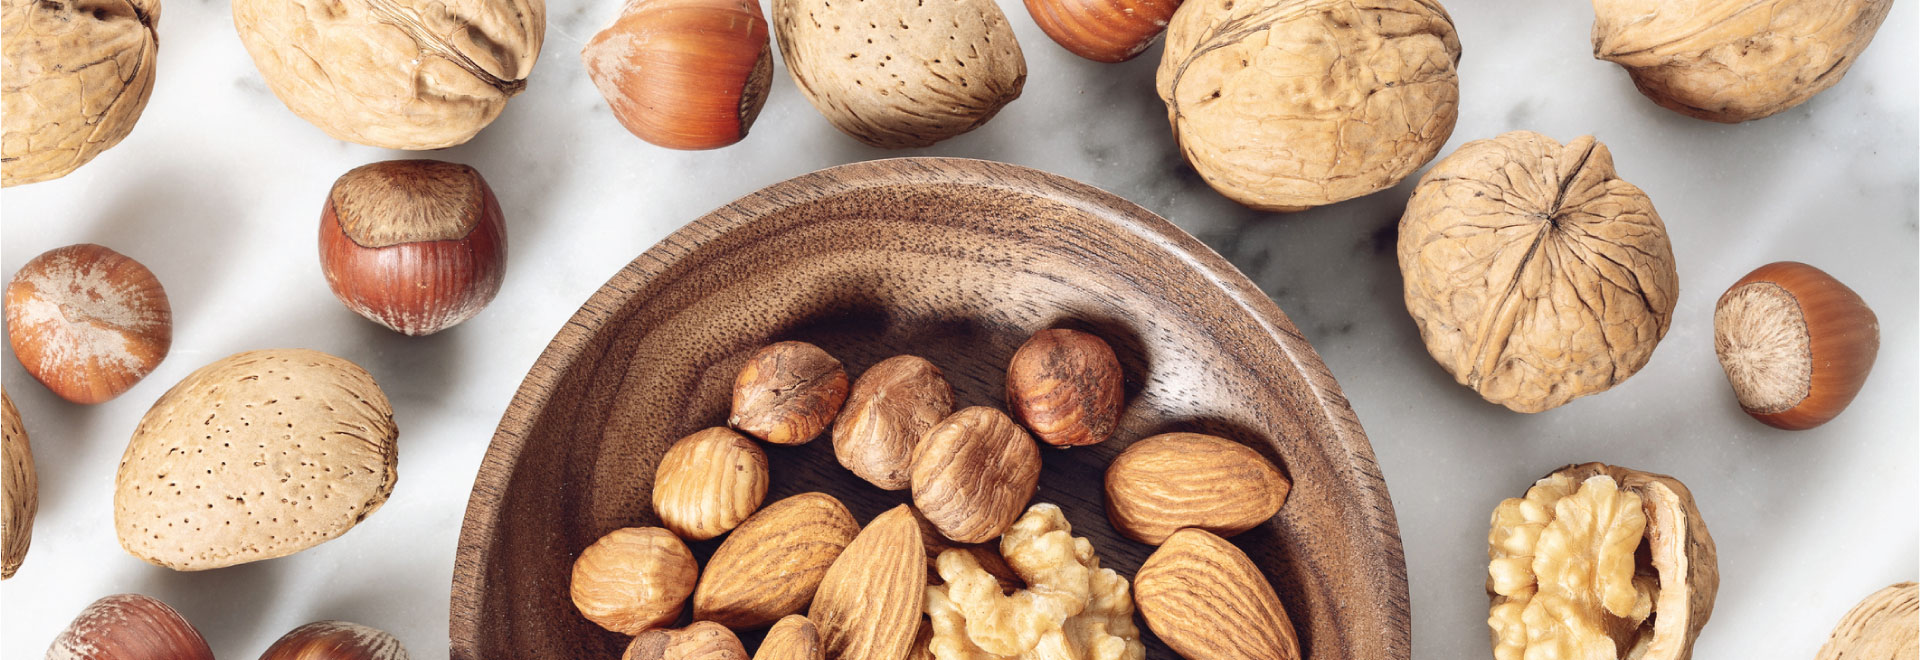 health-benefits-of-eating-nuts